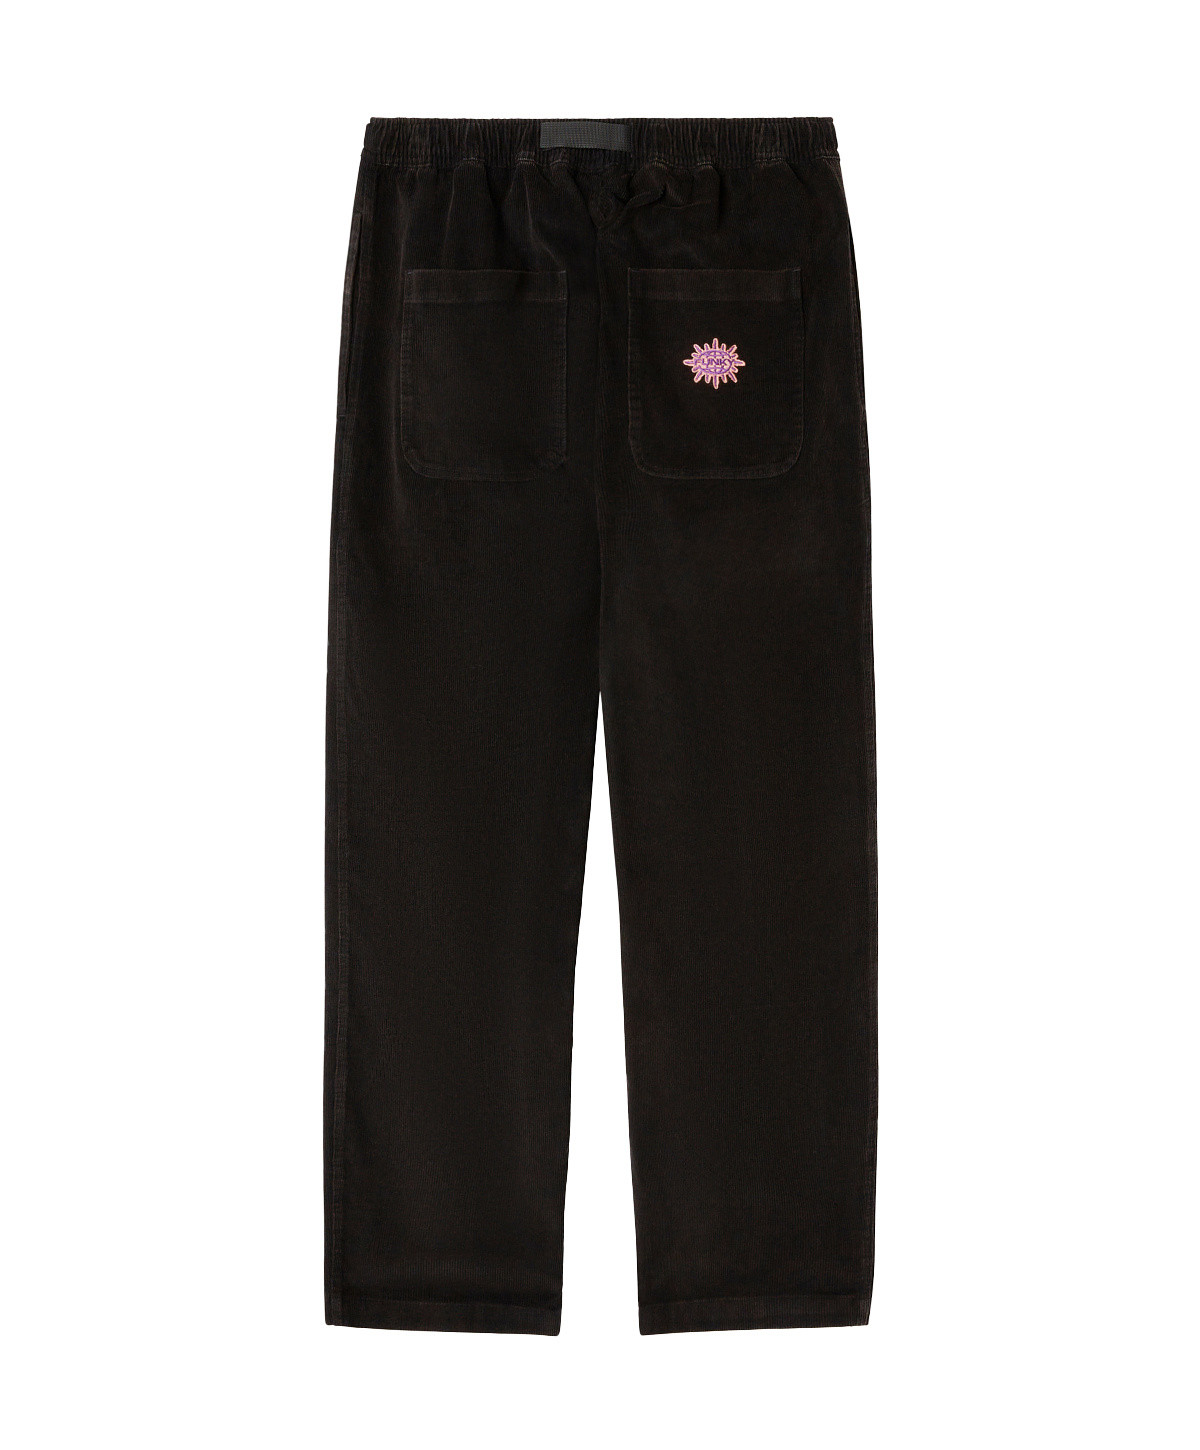 Funky - Corduroy trousers, Black, large image number 2